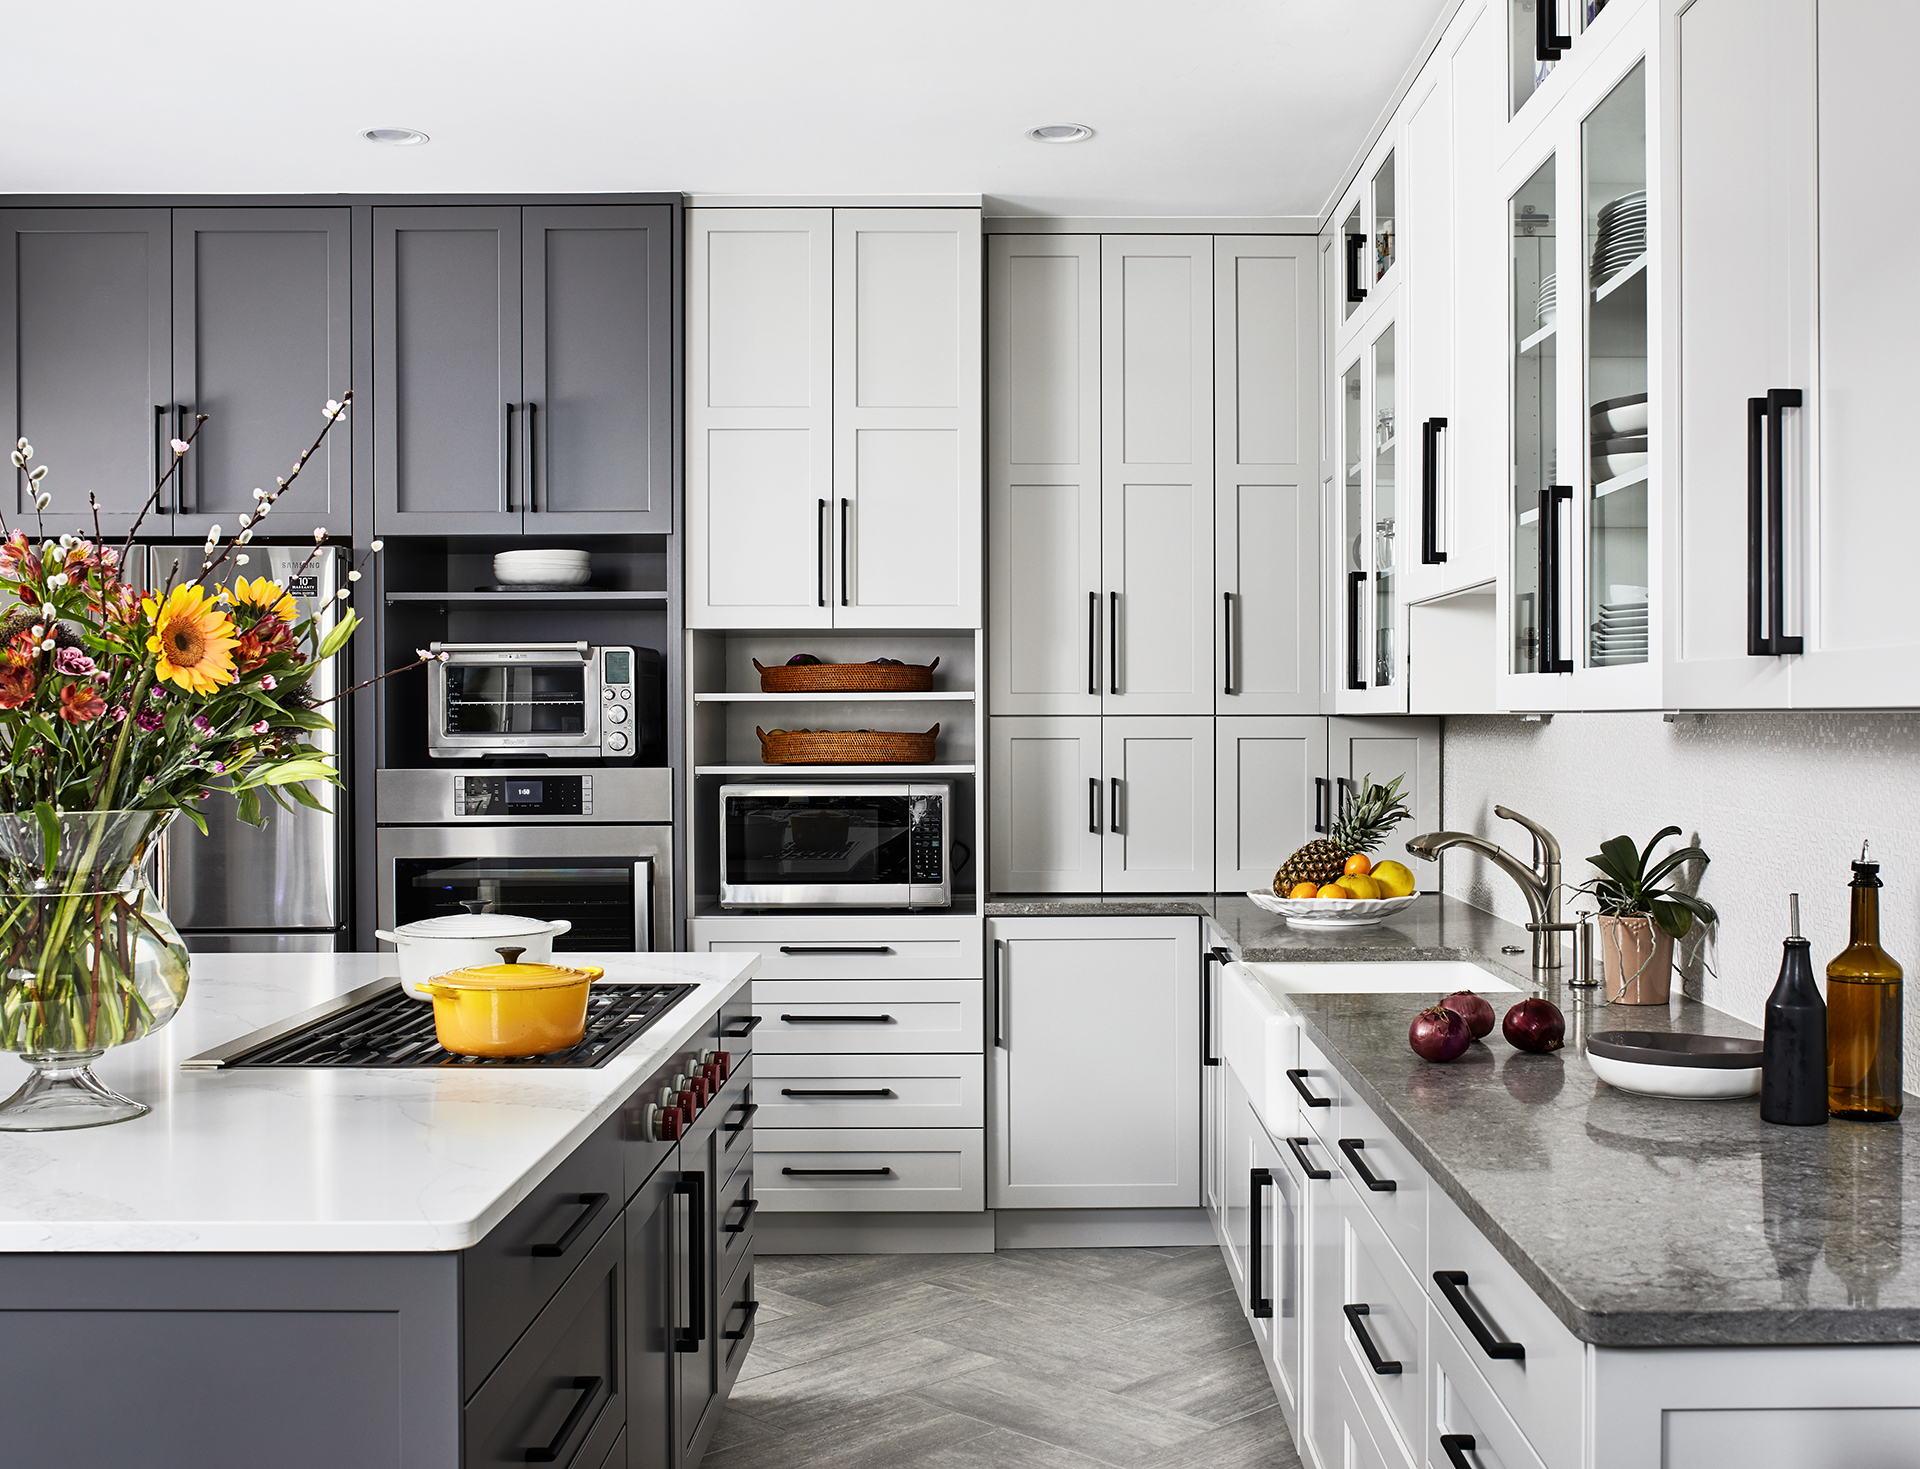 kitchen island with stove top and grey base, grey and white cabinets with black pull handles two open shelves